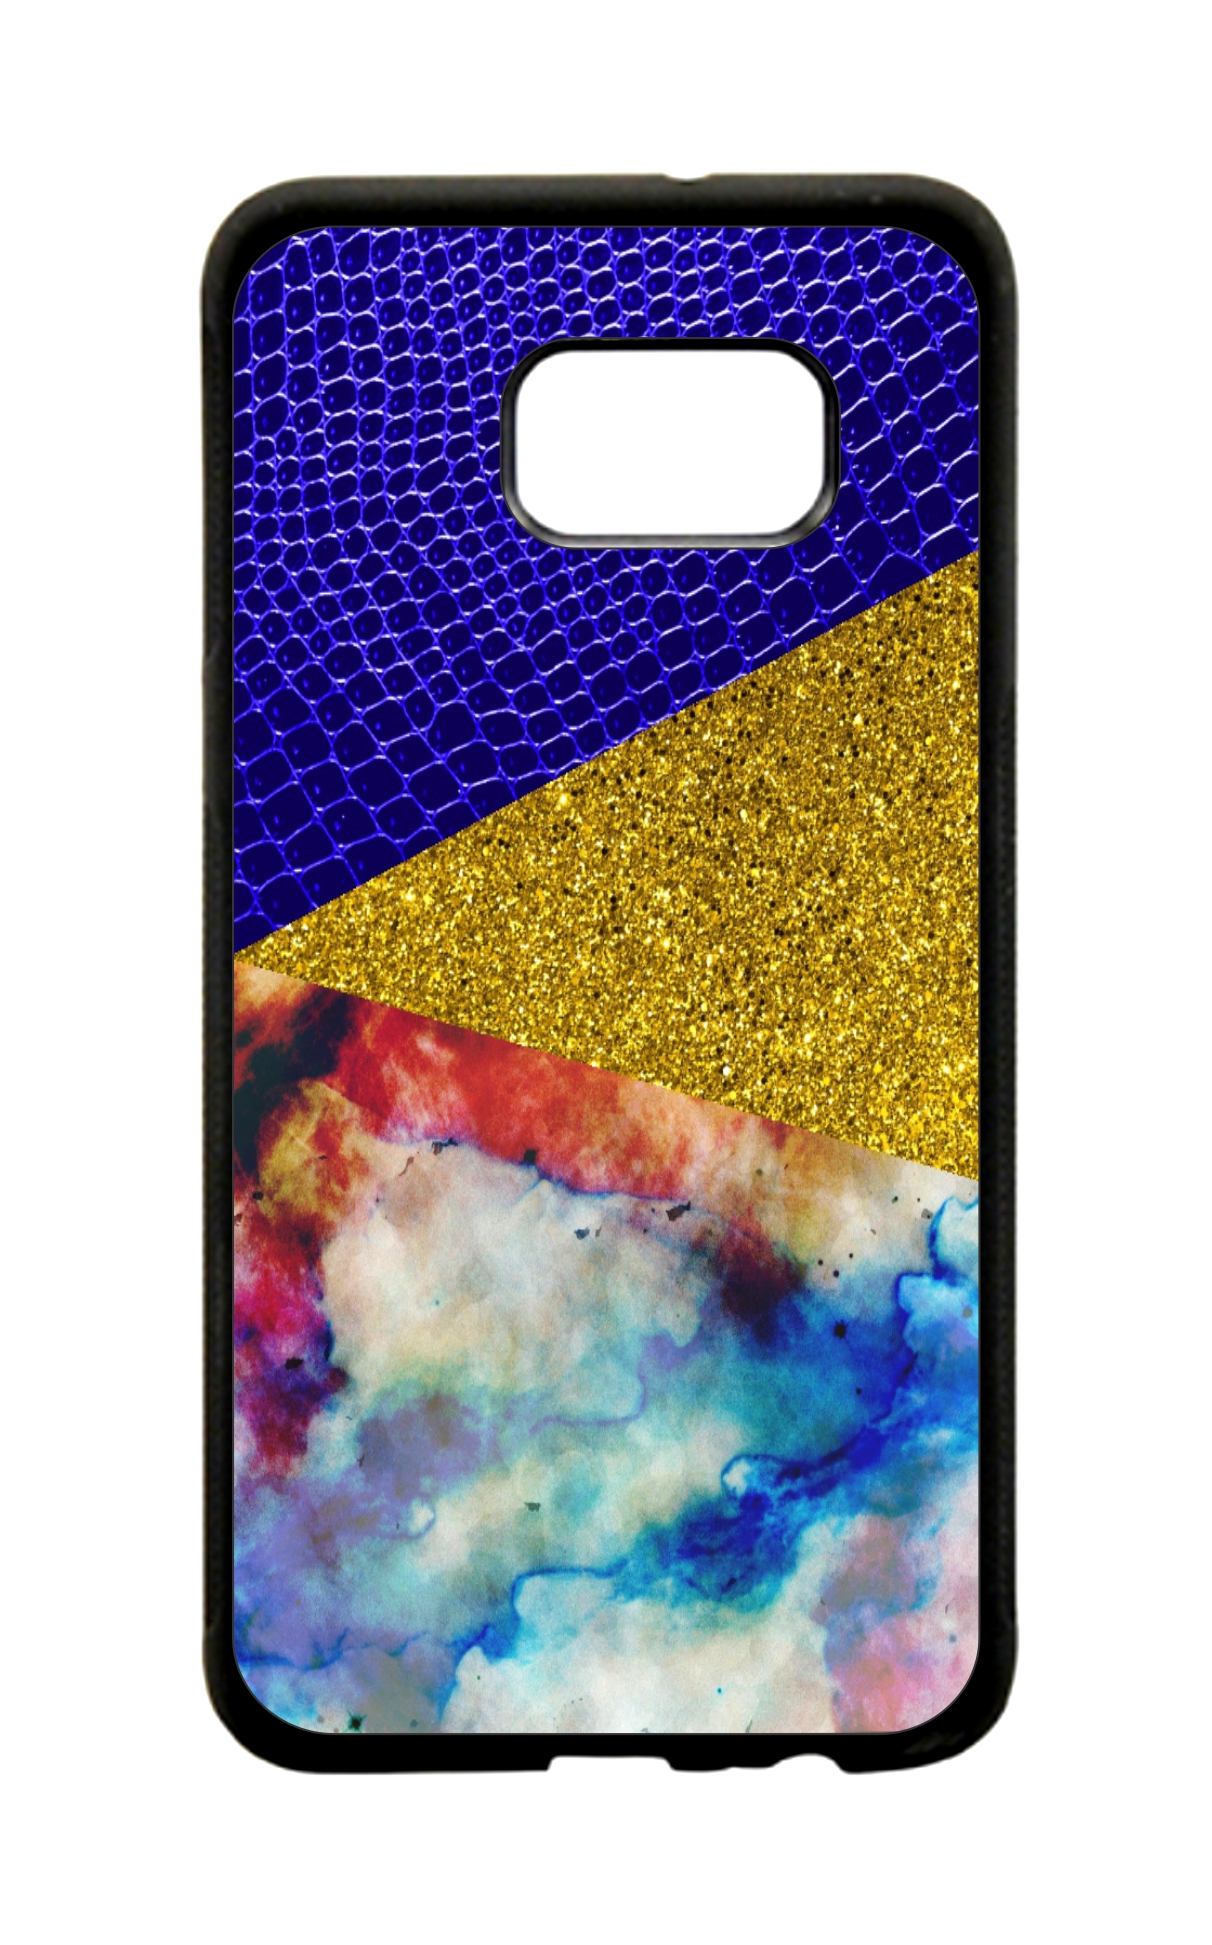 Blue Snakeskin Faux Gold Glitter and Colored Marble Print Design Black Rubber Thin Case TPU Cover for the Samsung Galaxy s6 Edge - Samsung Galaxy s6 Edge Accessories - Galaxy s6 Edge Case - image 1 of 2